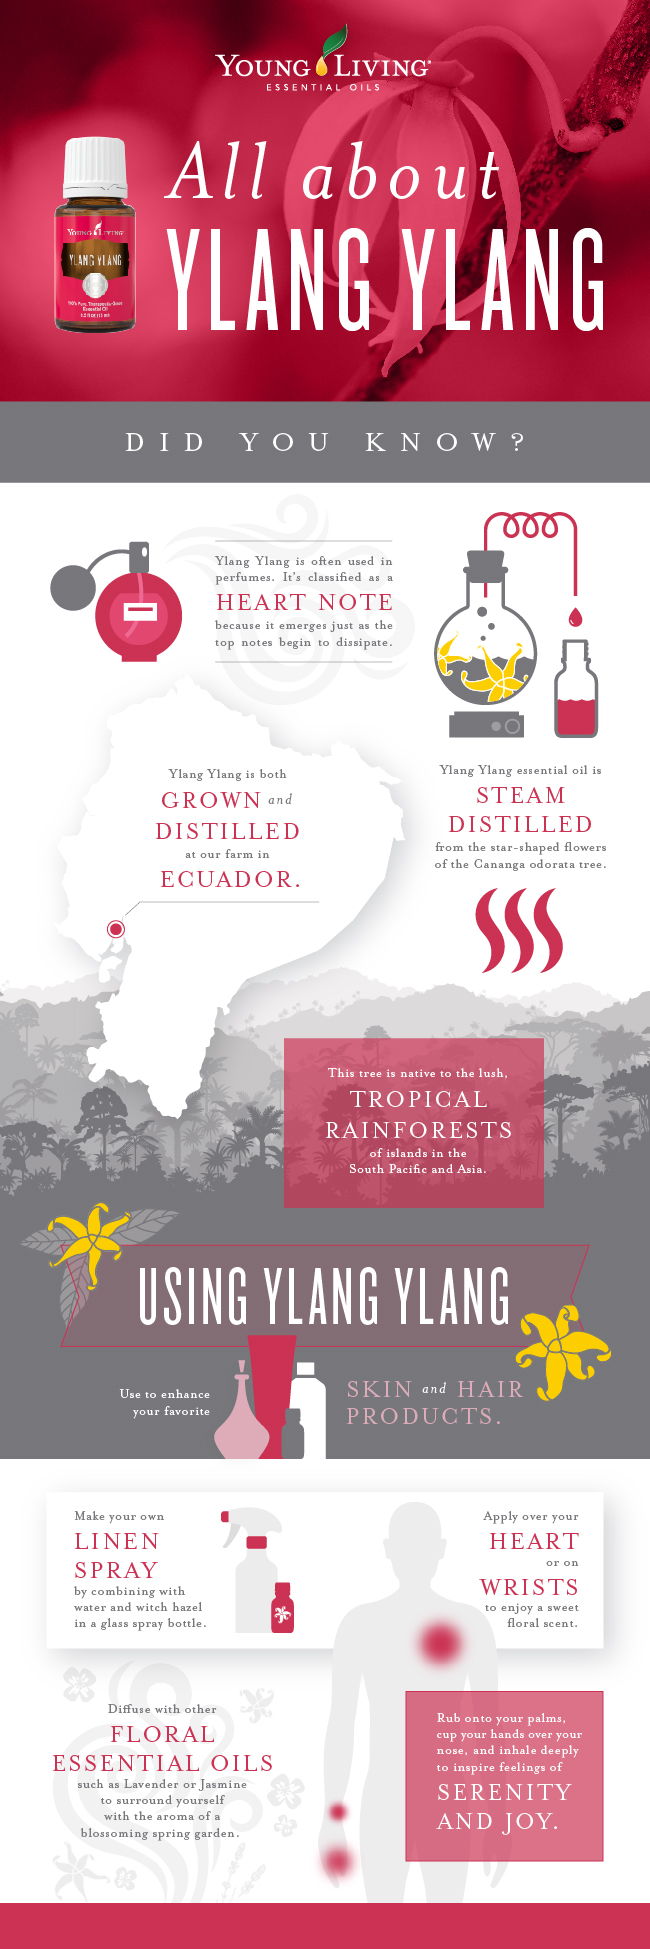 blog_AllAboutYlangYlang_infographic_US-01-1